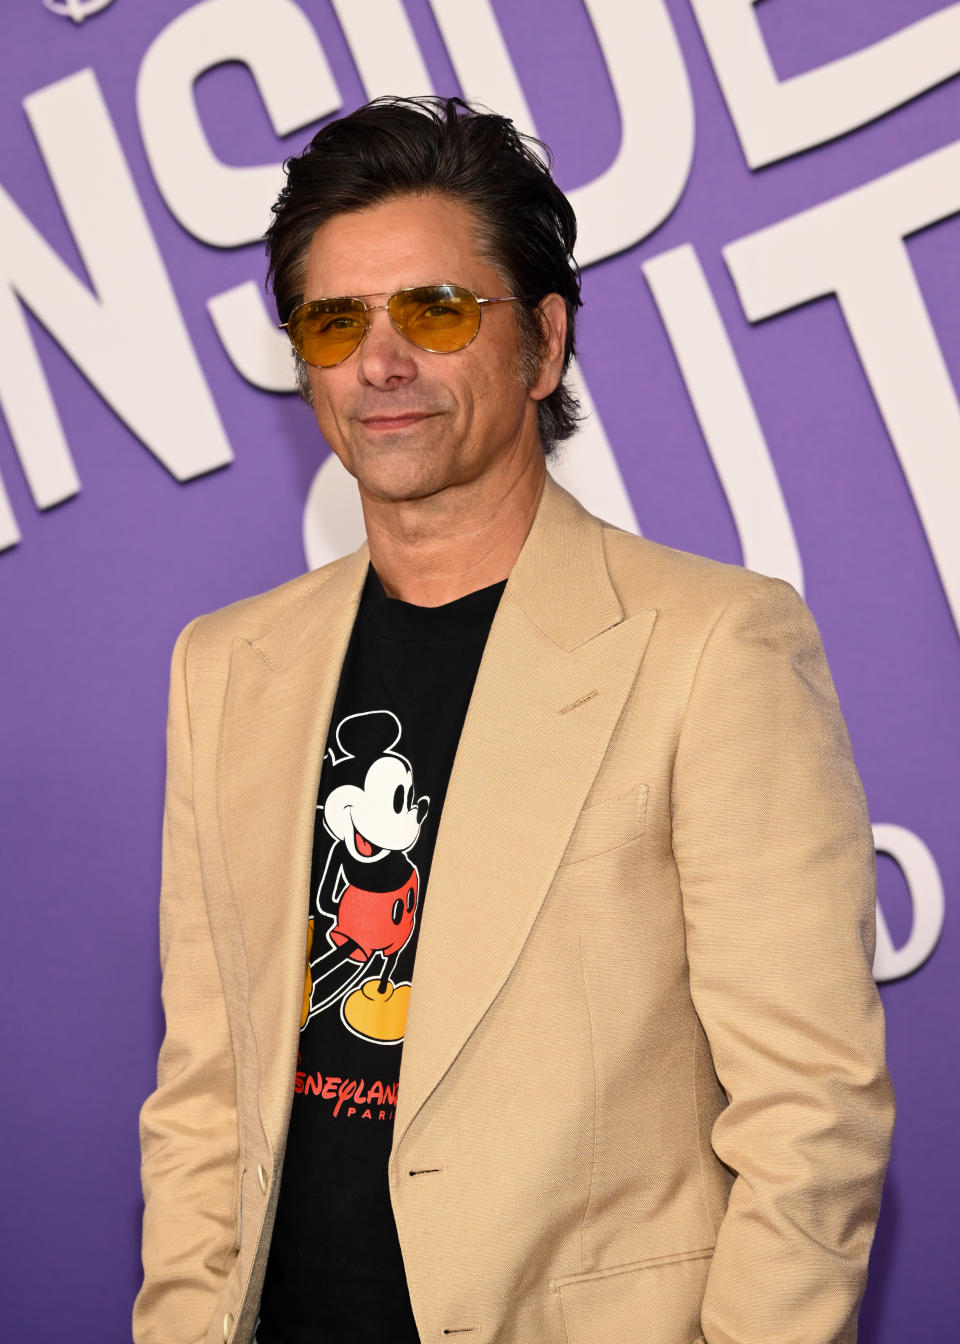 John Stamos wearing a Mickey Mouse T-shirt and beige blazer, attending a celebrity event in front of a large purple "Inside Out" sign